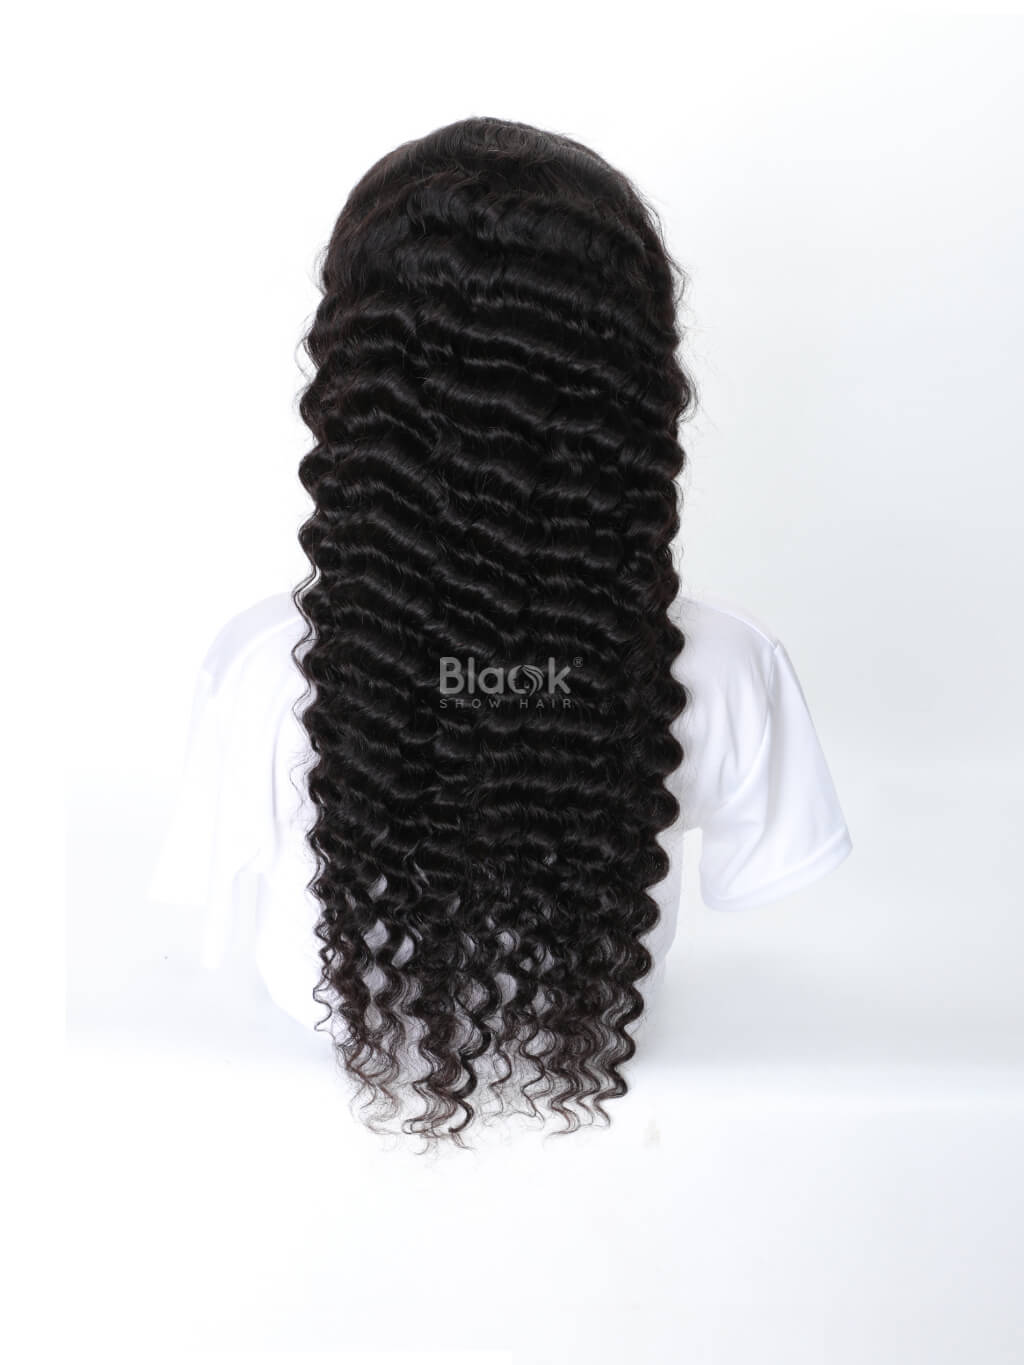 13x4 hd lace rontal wig deep wave 3